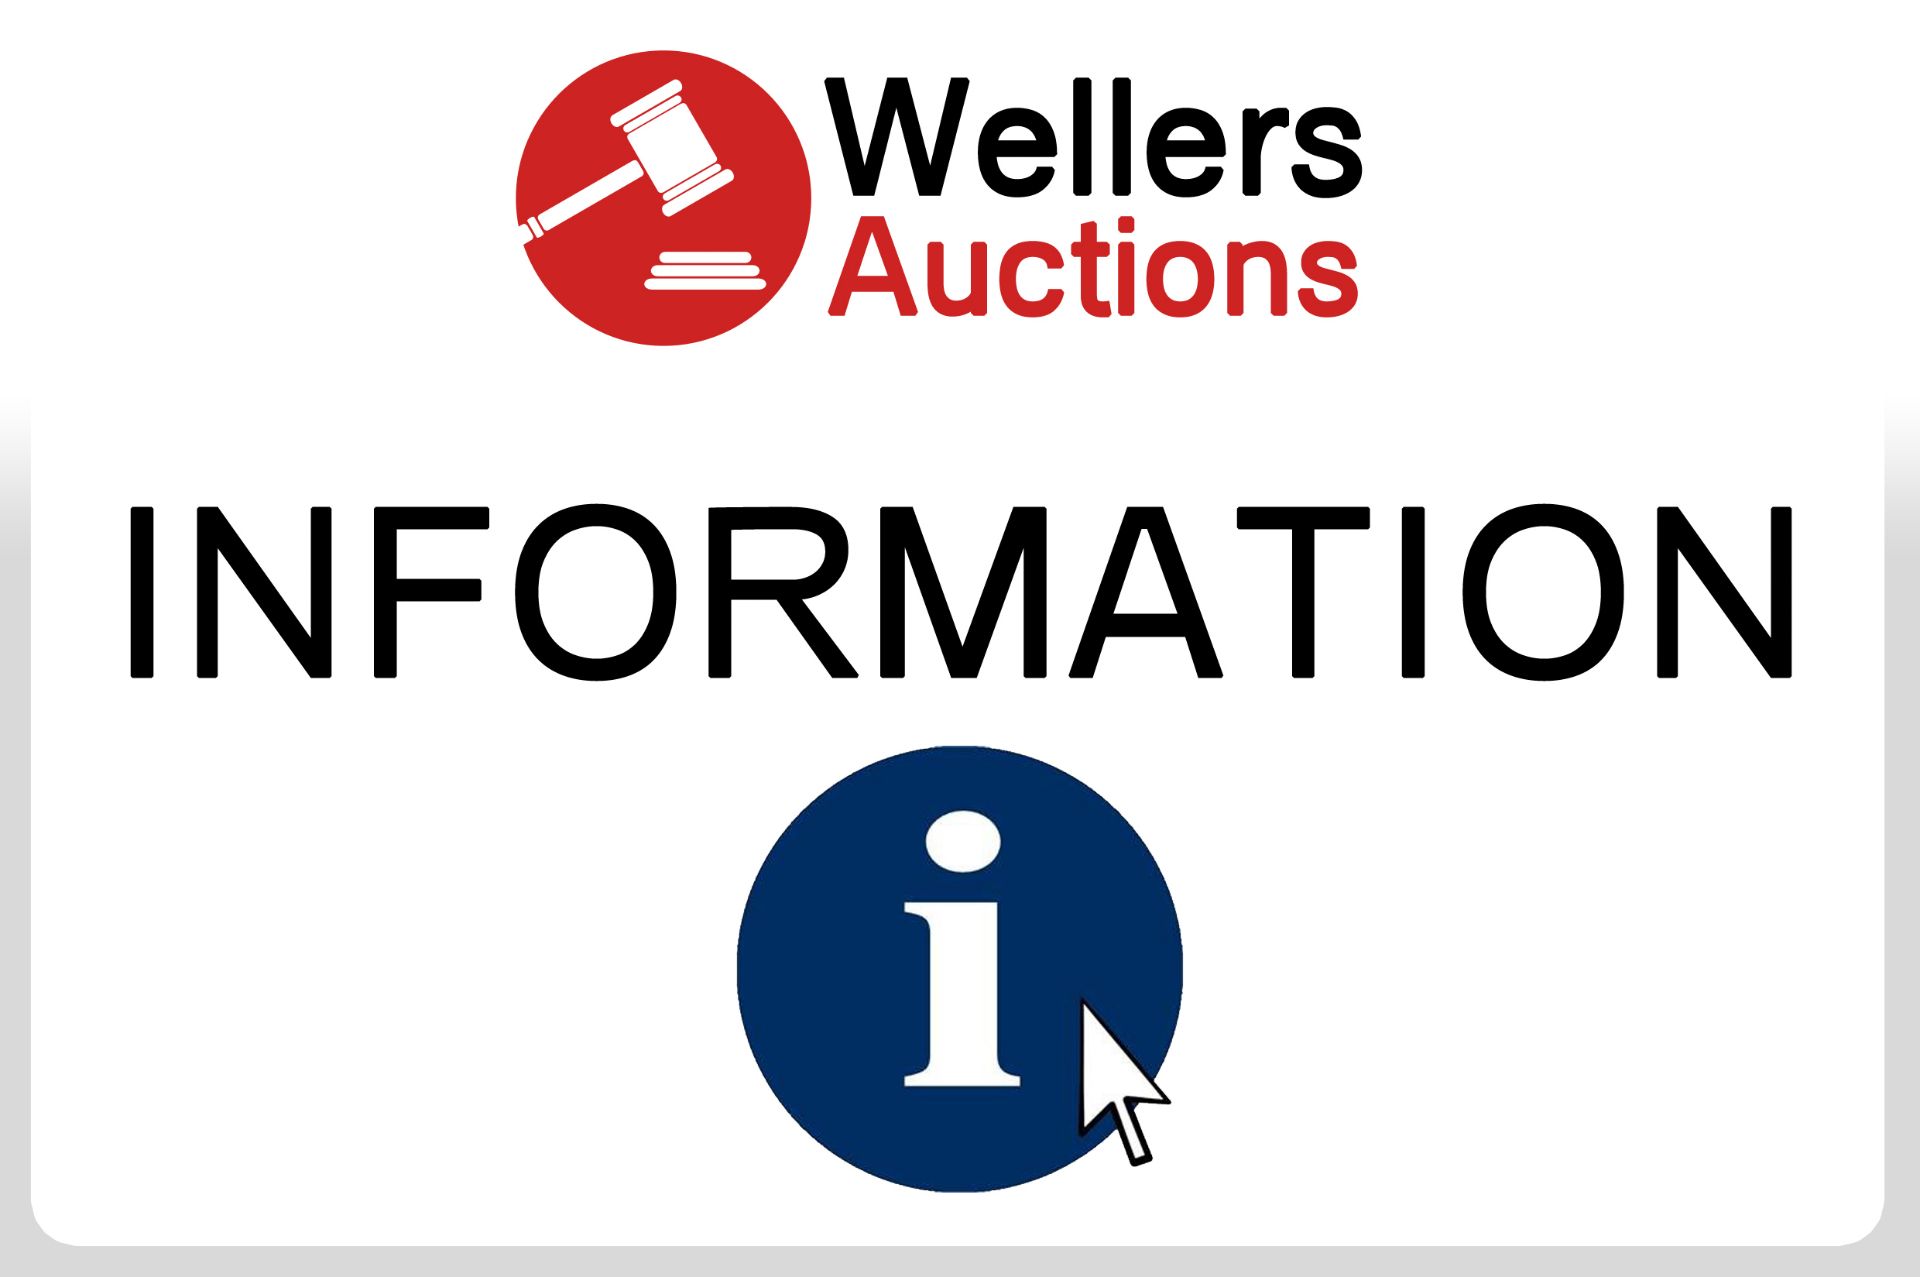 THE FOLLOWING LOTS WILL BE BROADCAST FOR ONLINE BIDDING AT 12:30 - IMAGES WILL BE CONTINUALLY